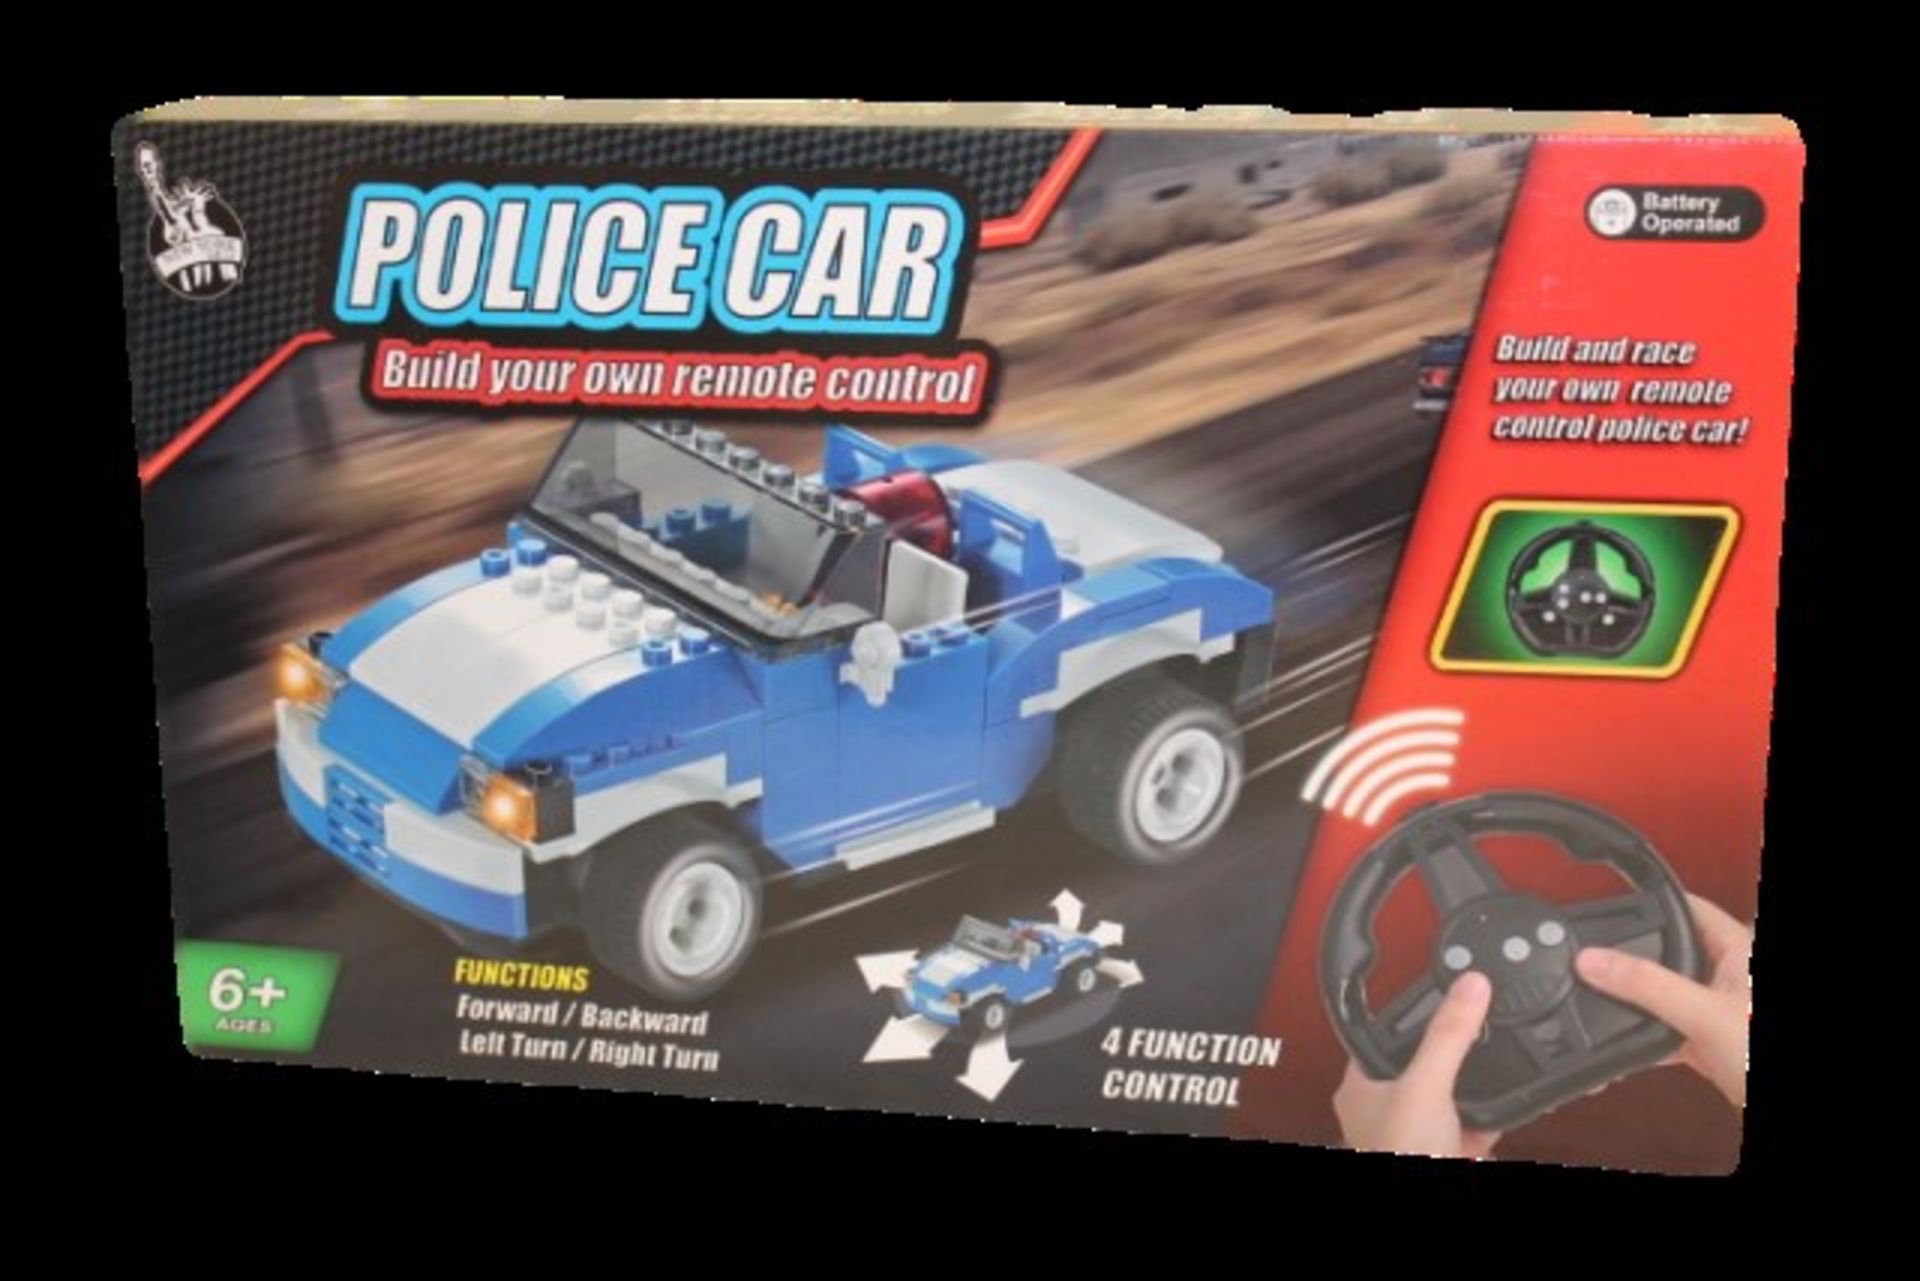 V Brand New Radio Controlled Build your own Police Car Full function r/c Matches Lego RRP ú49.99 X 2 - Image 2 of 2